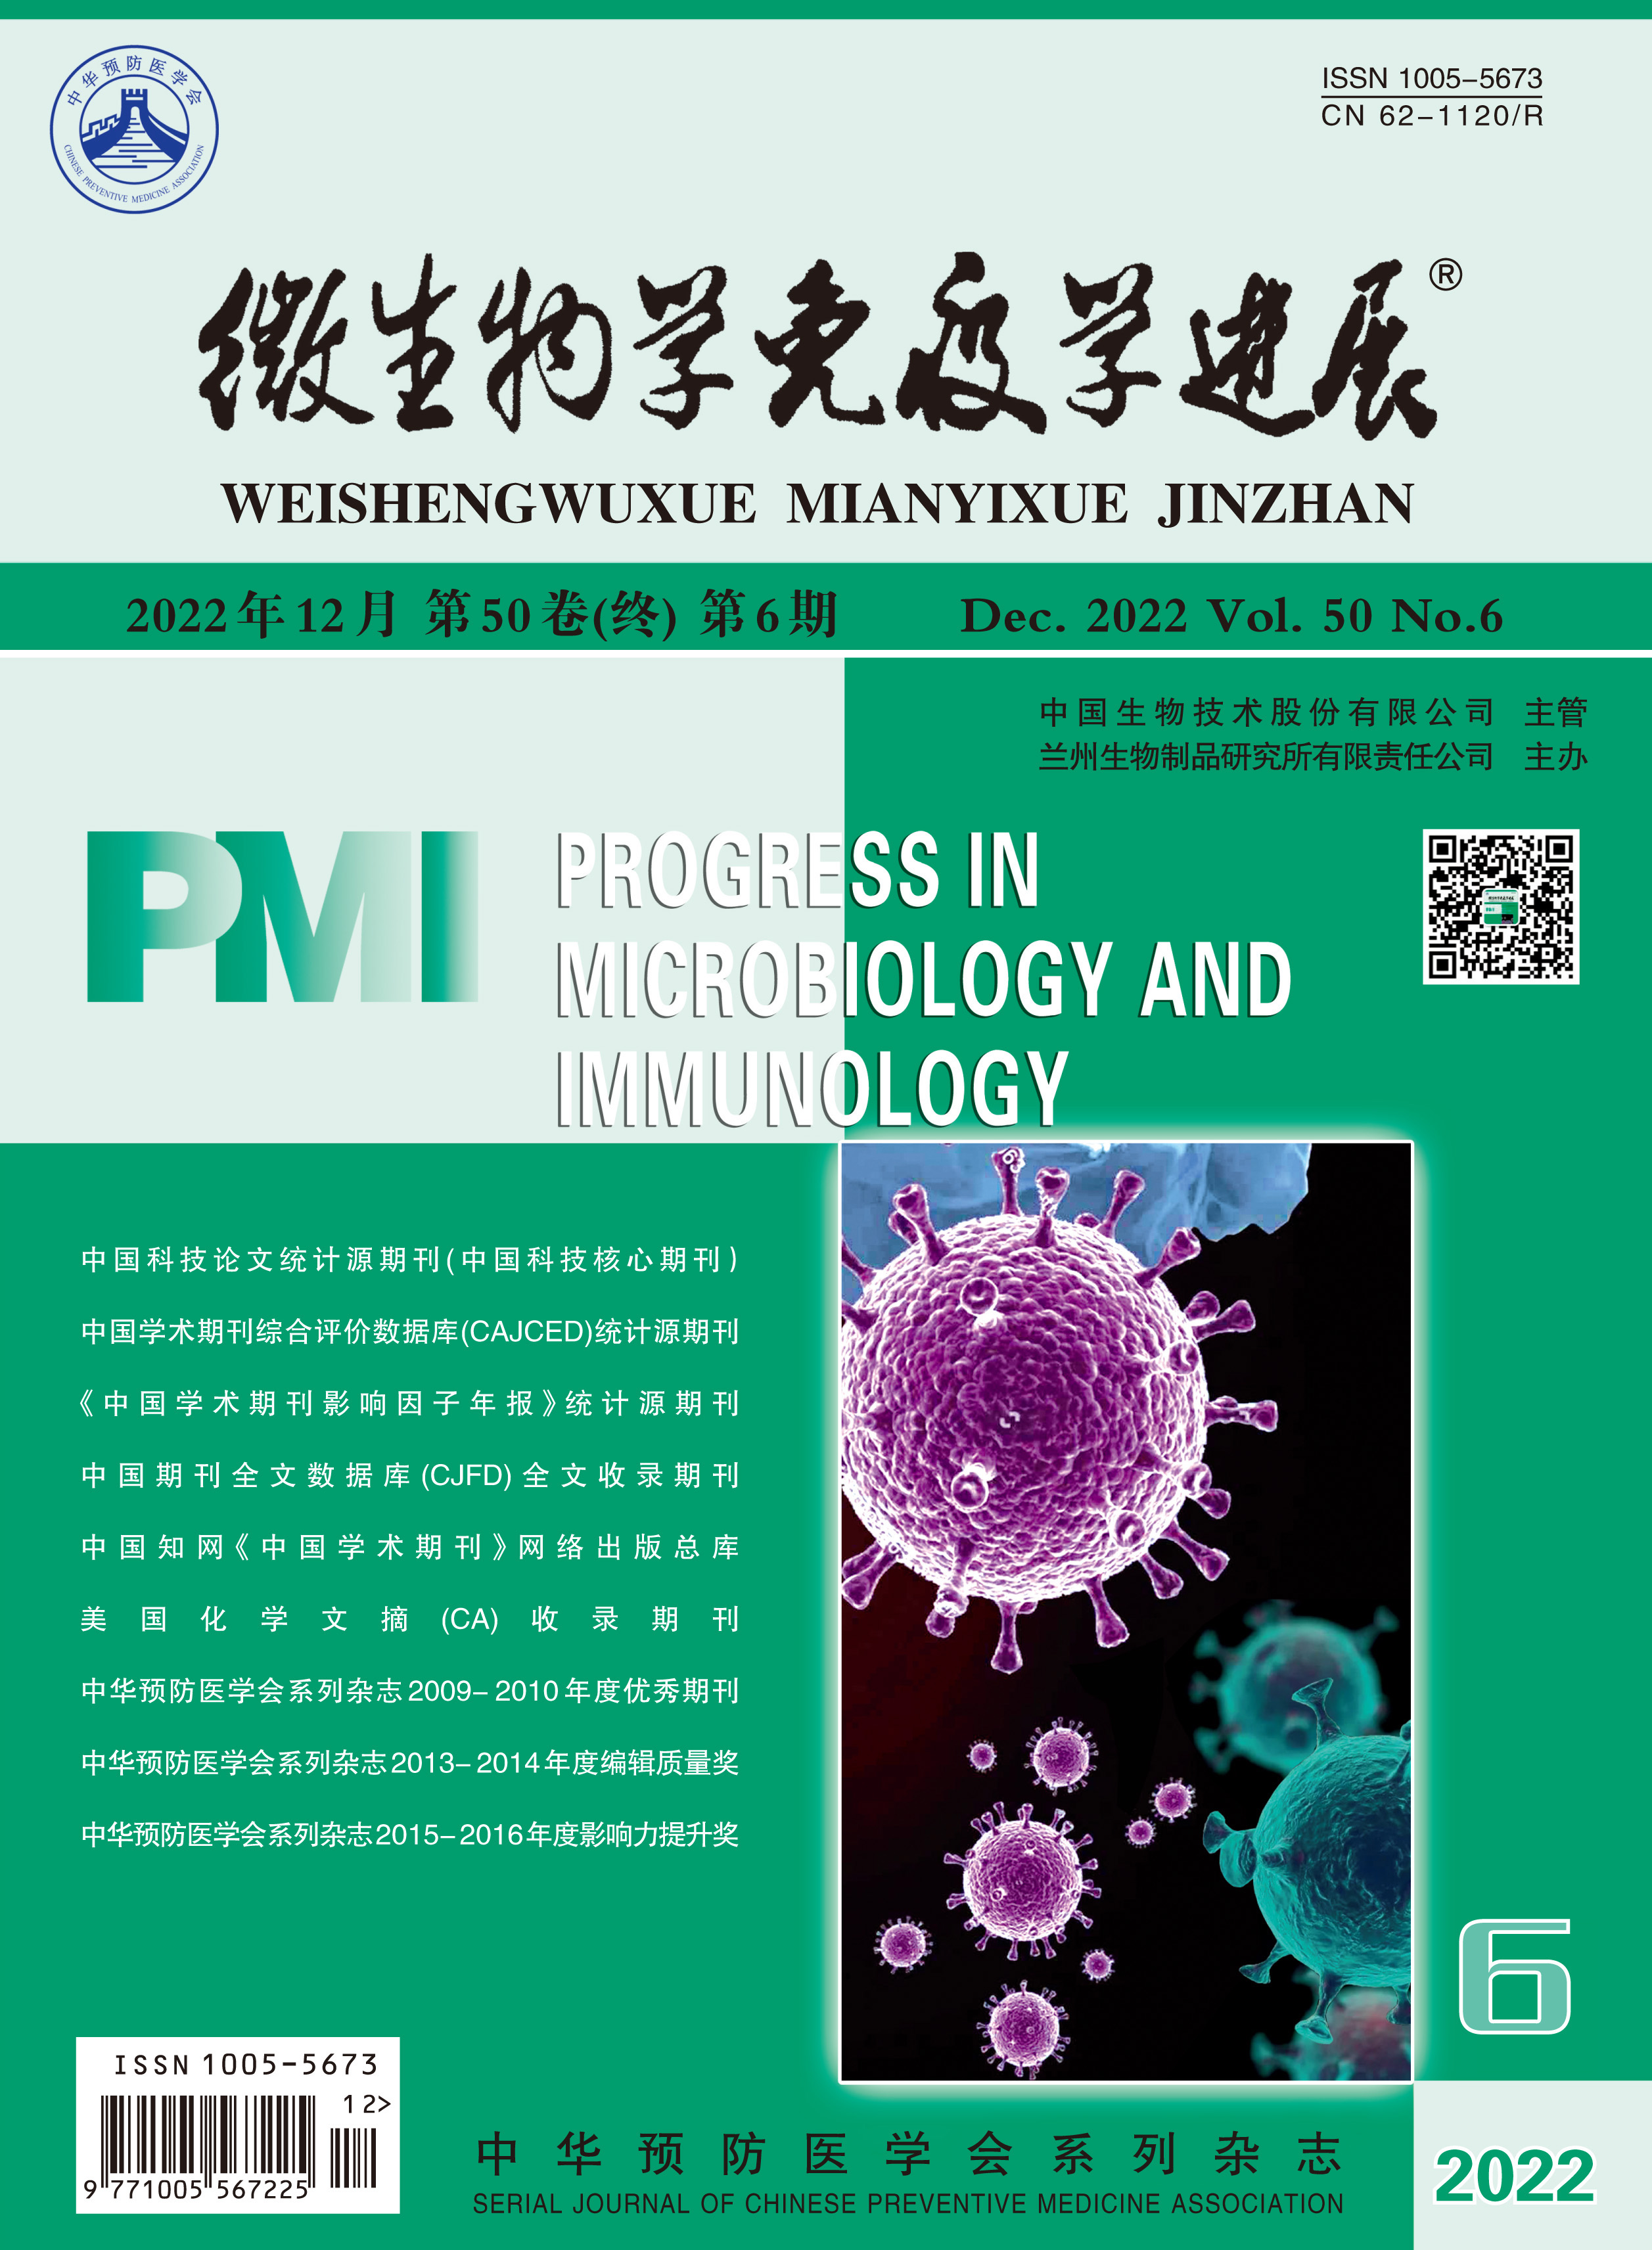 Progress in Microbiology and Immunology